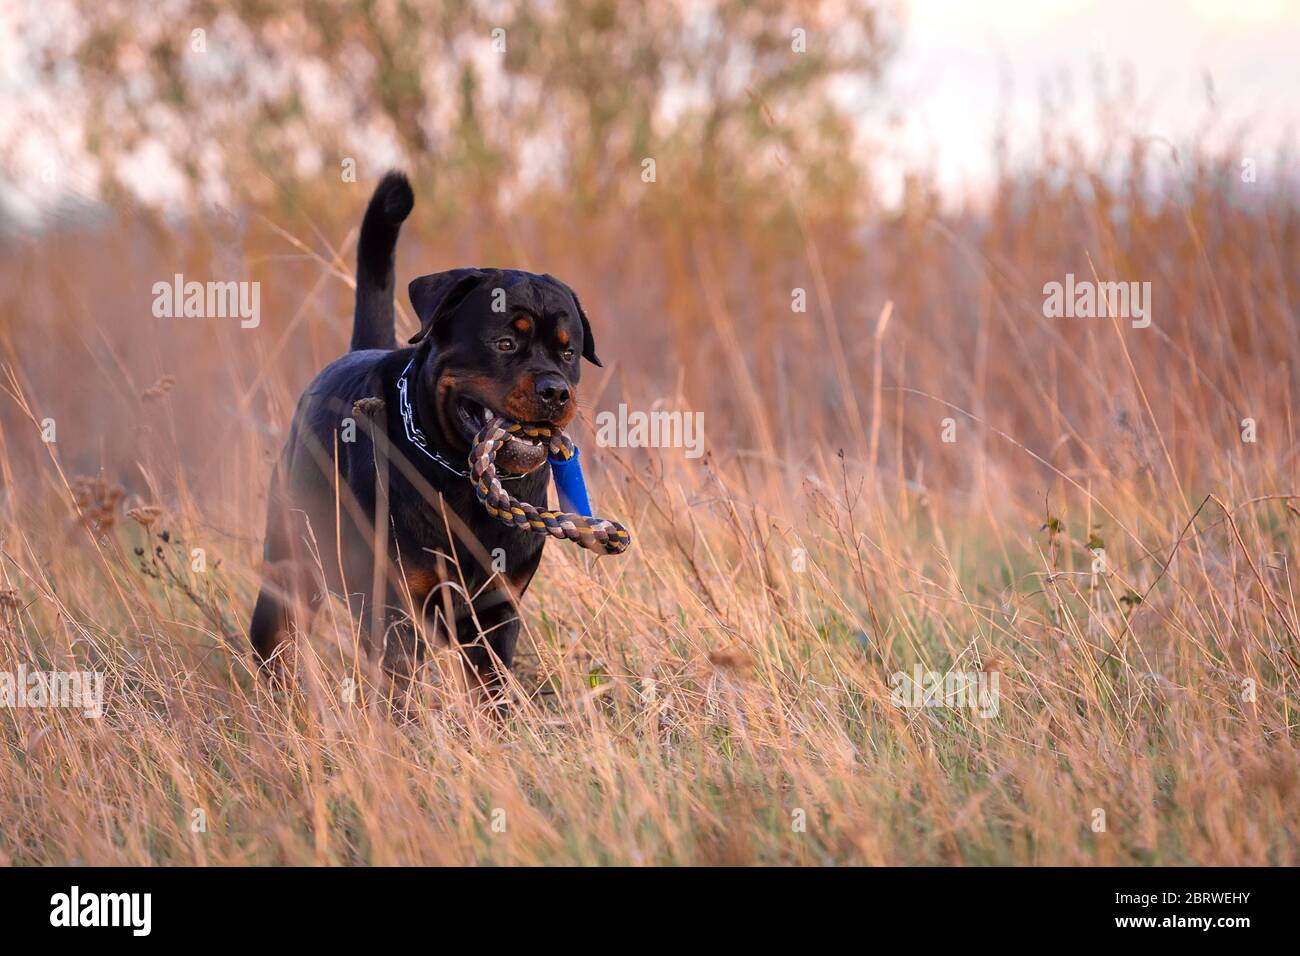 Young rottweiler dog playing with a toy Stock Photo